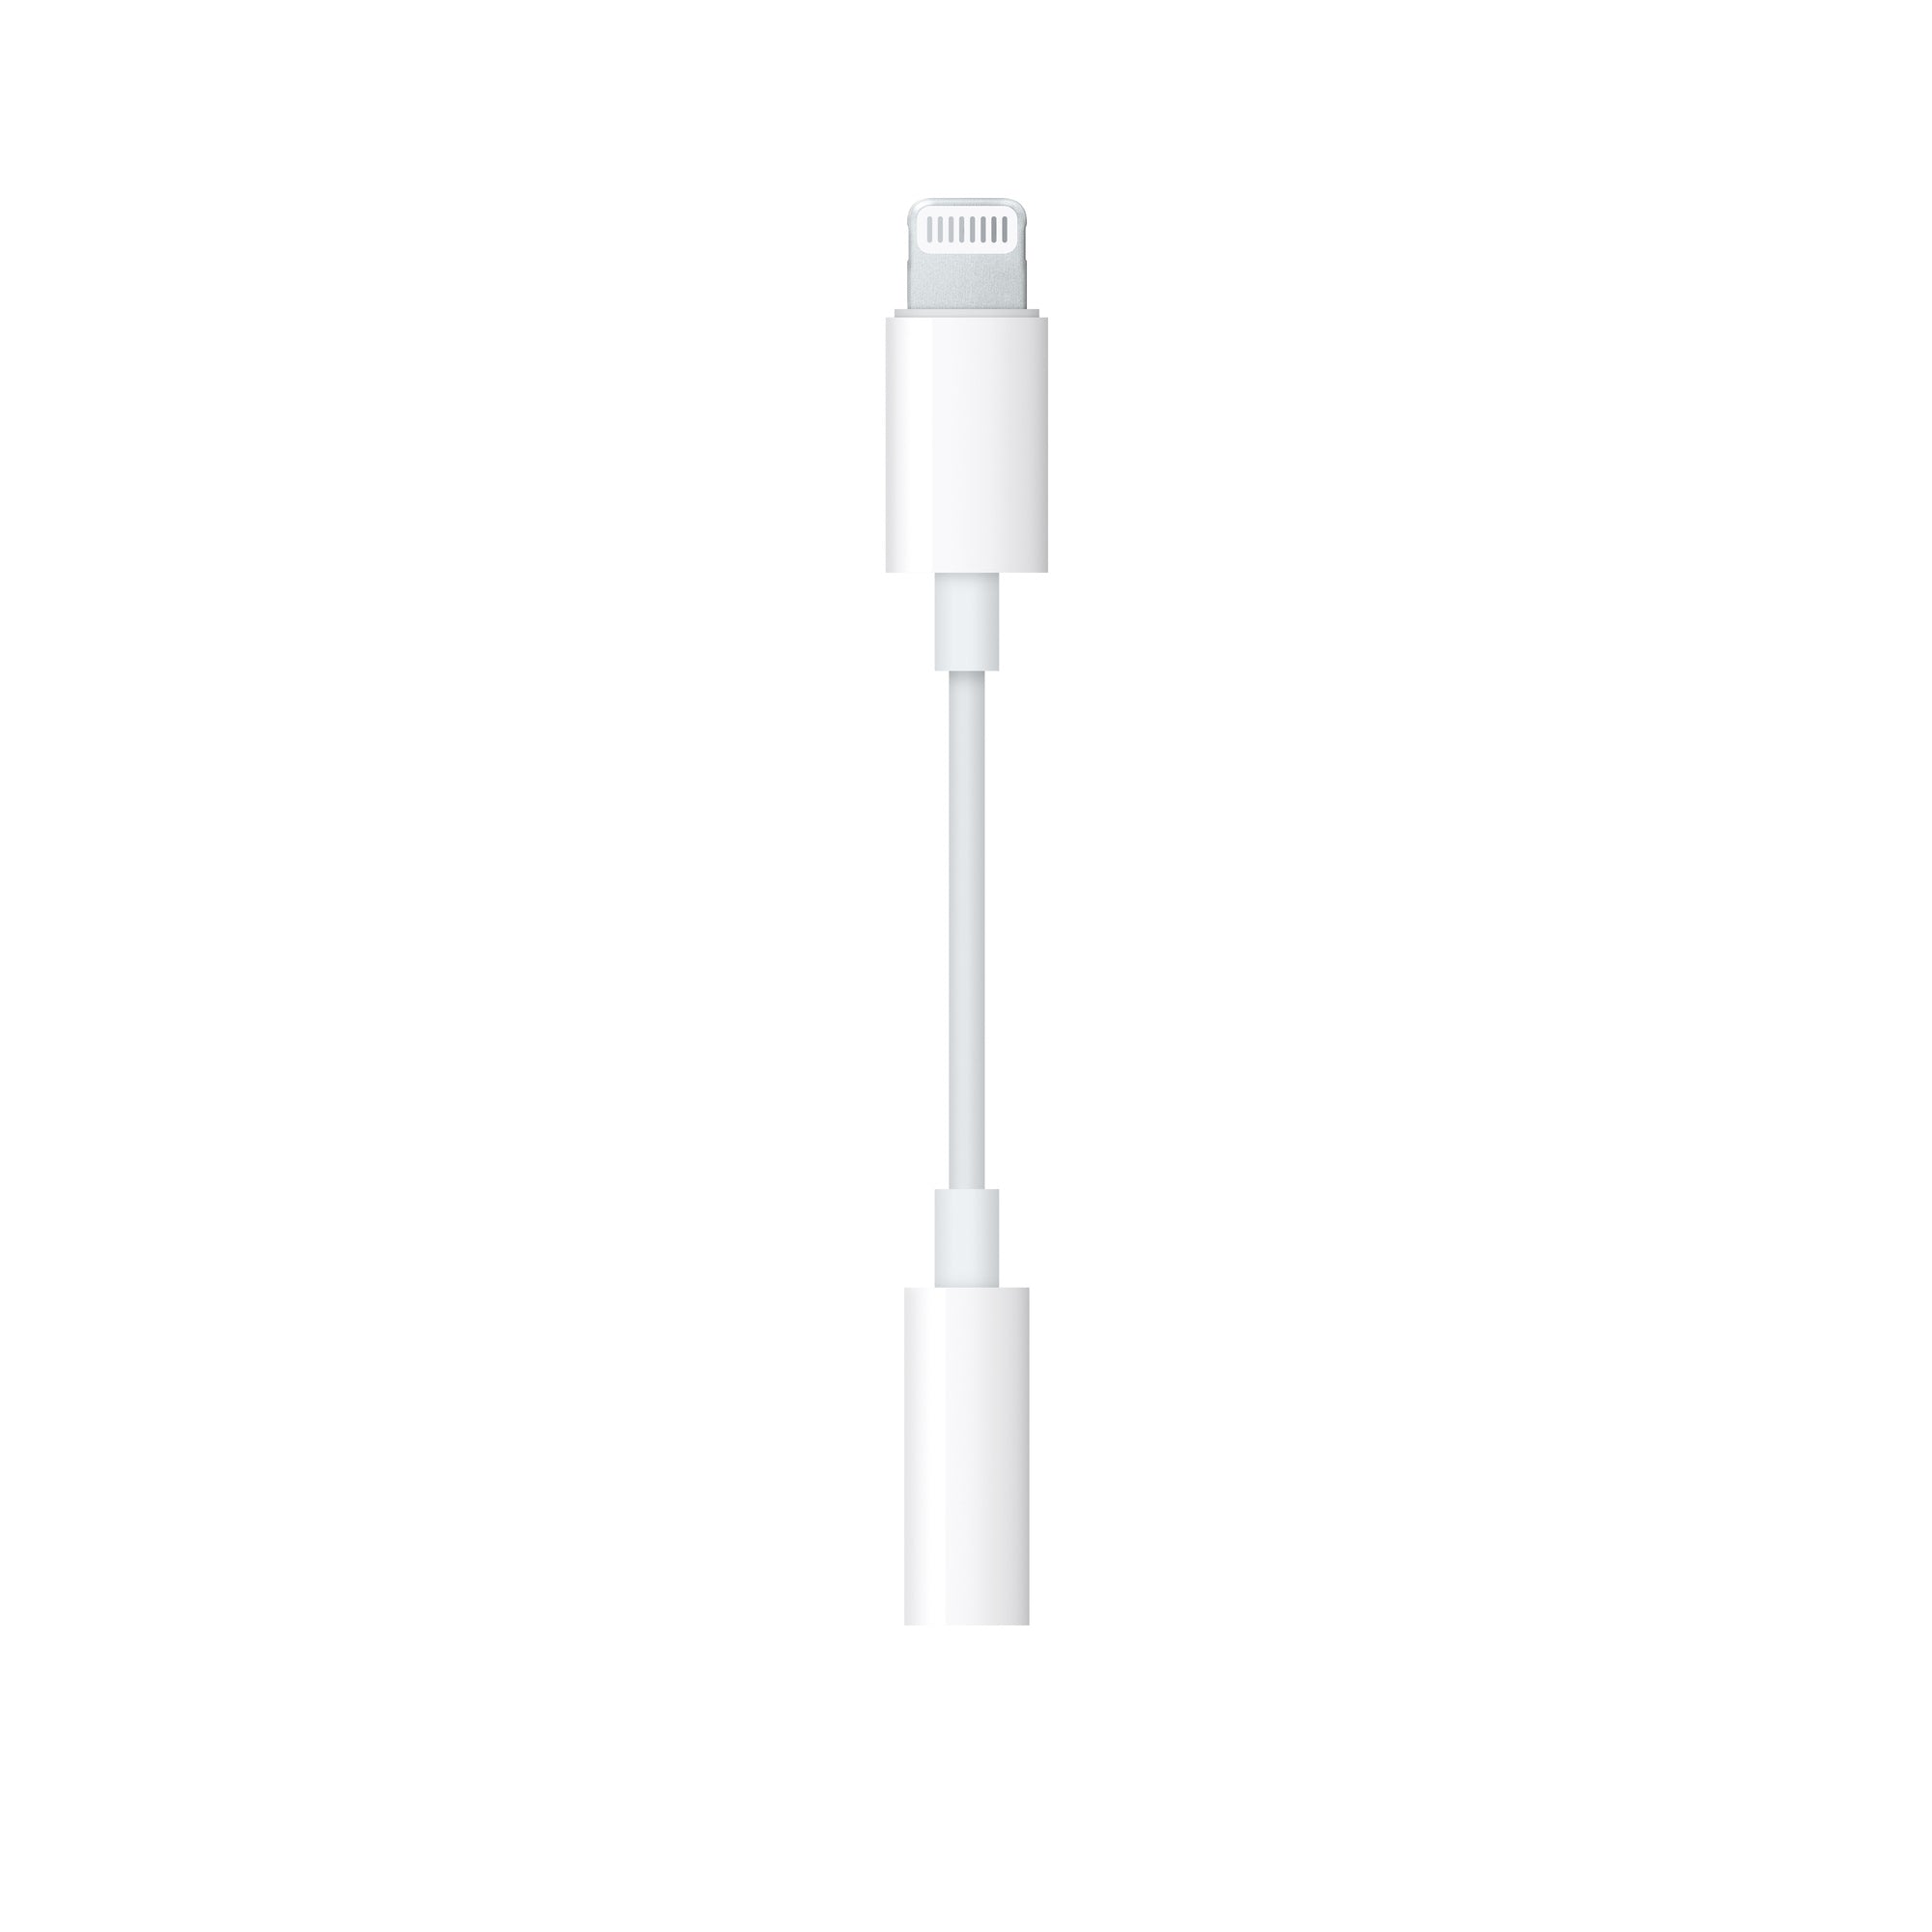 Apple iPad Pro 12.9-inch (2nd Generation) Heaphone Jack Connector (Lightning to 3.5mm)